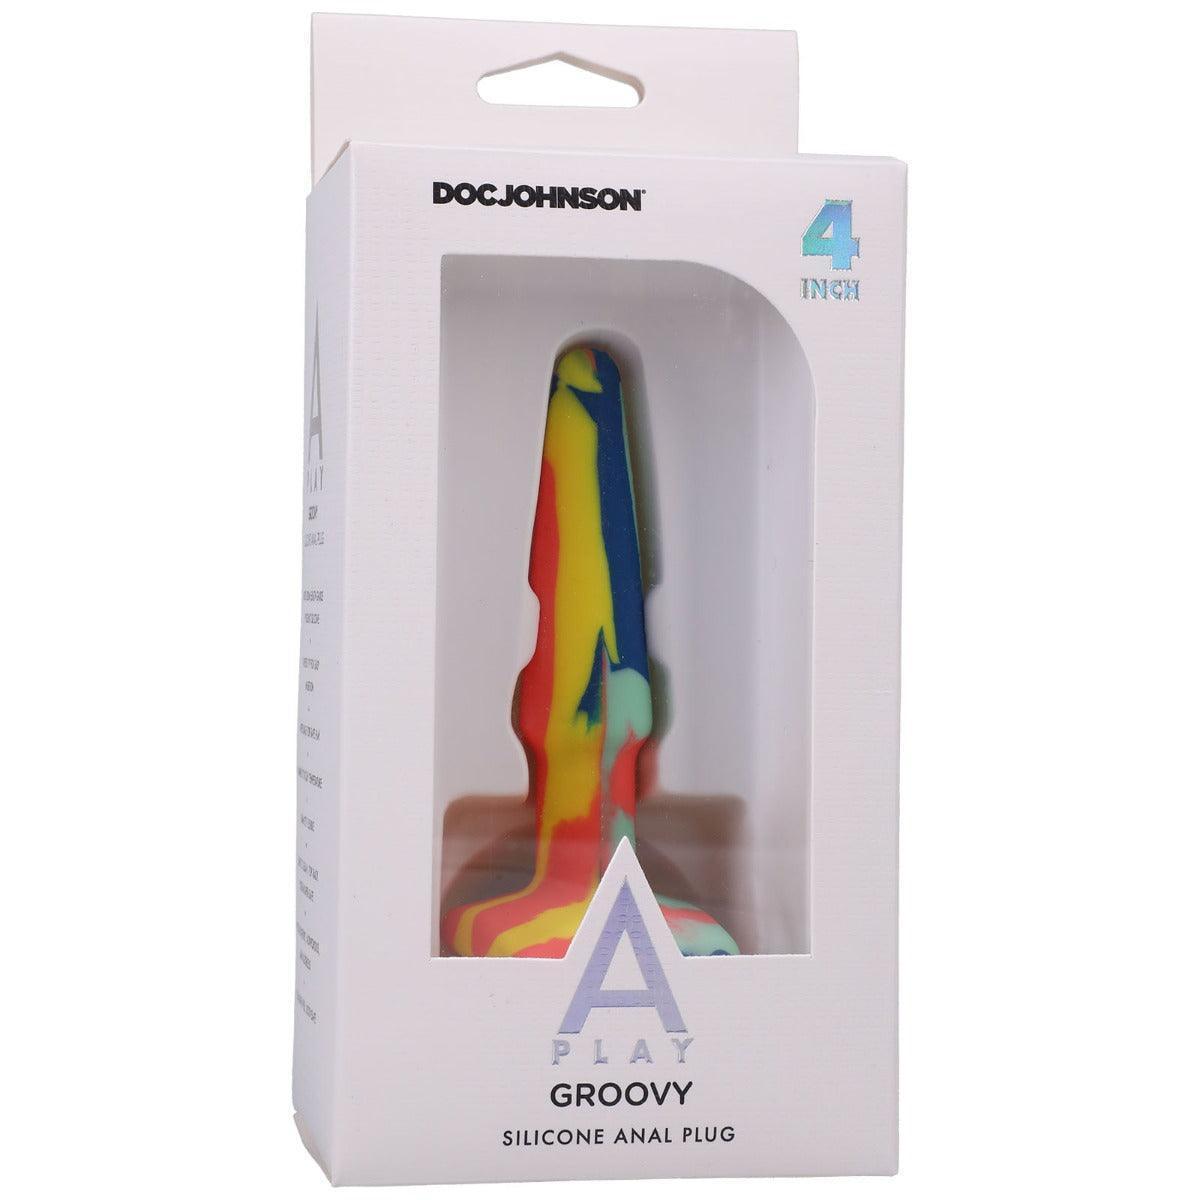 A-Play - Groovy - Silicone Anal Plug - 4 inch Yellow Multi-coloured